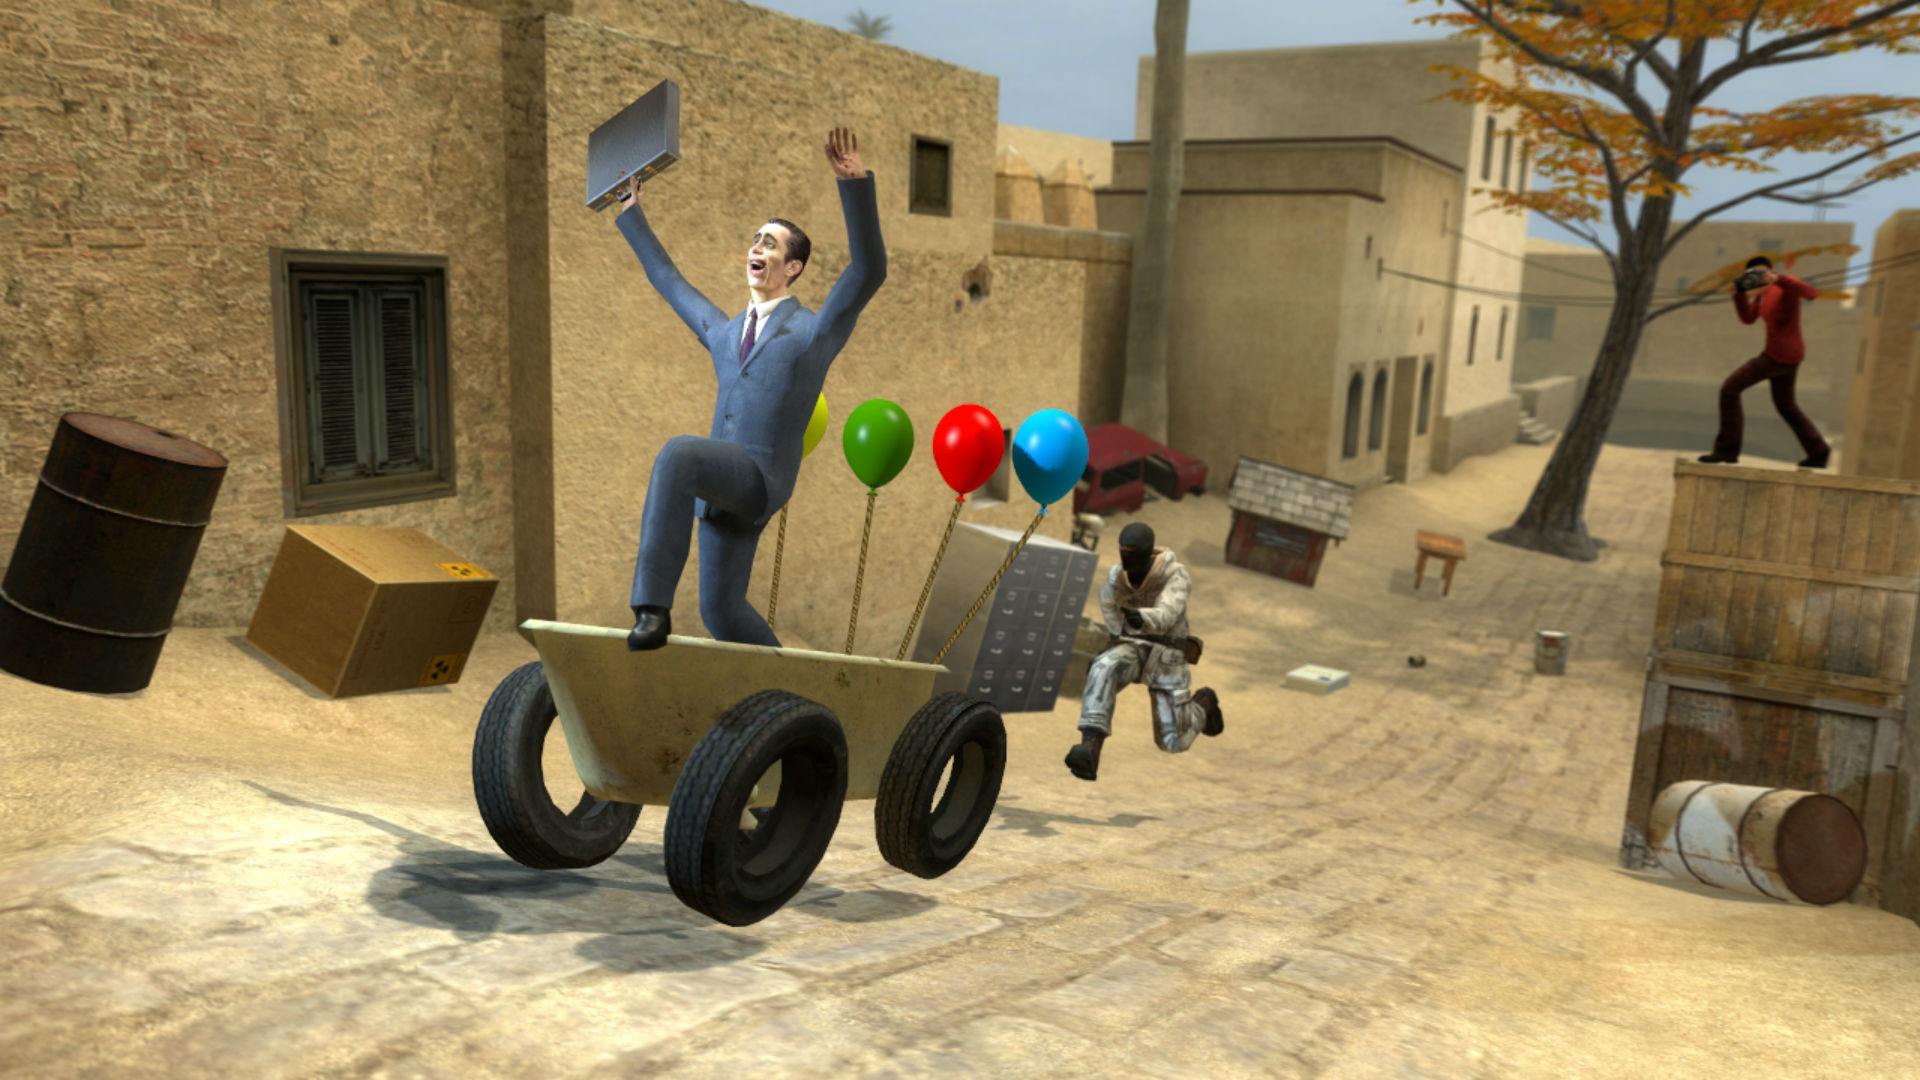 i (tried to) recreate one of the photos of gmod on steam : r/gmod